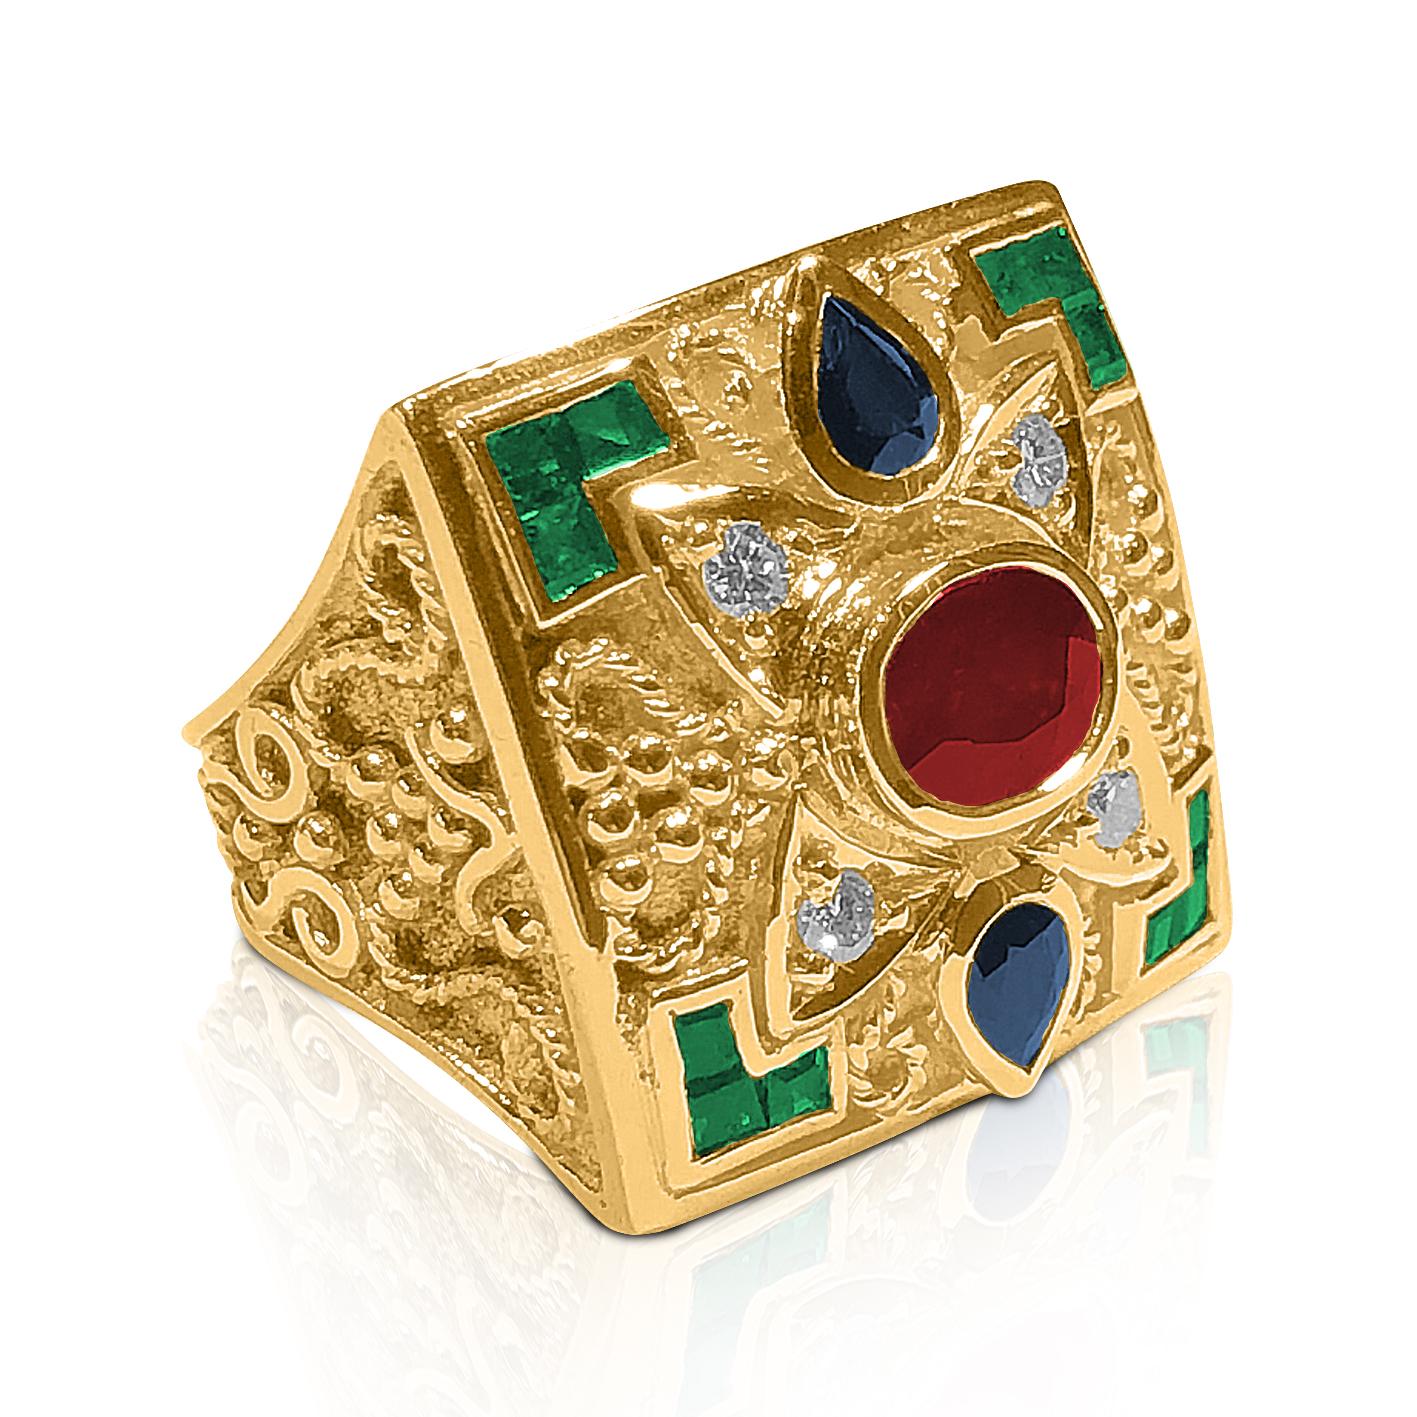 This S.Georgios ring is handmade from solid 18 Karat Yellow Gold. The ring is microscopically decorated with gold wires and beads. Granulated details contrast with Byzantine background finish. The Ring features brilliant cut diamonds total weight of